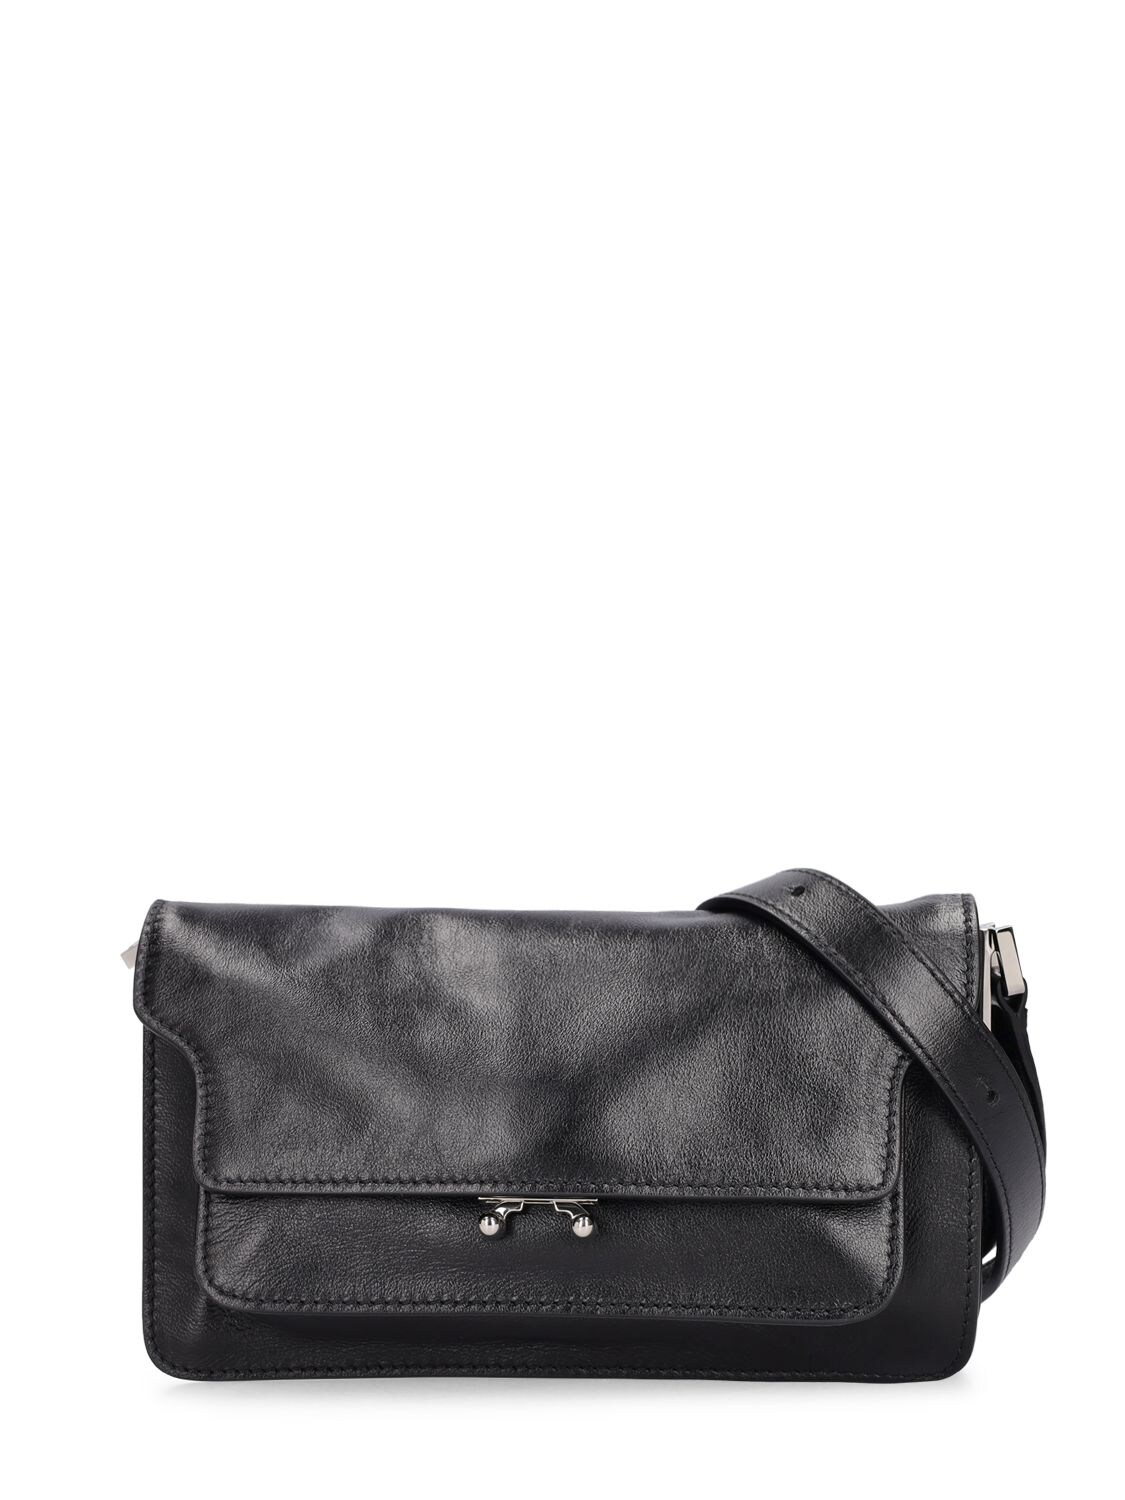 Trunk Soft Medium Bag in black and white leather, Marni in 2023